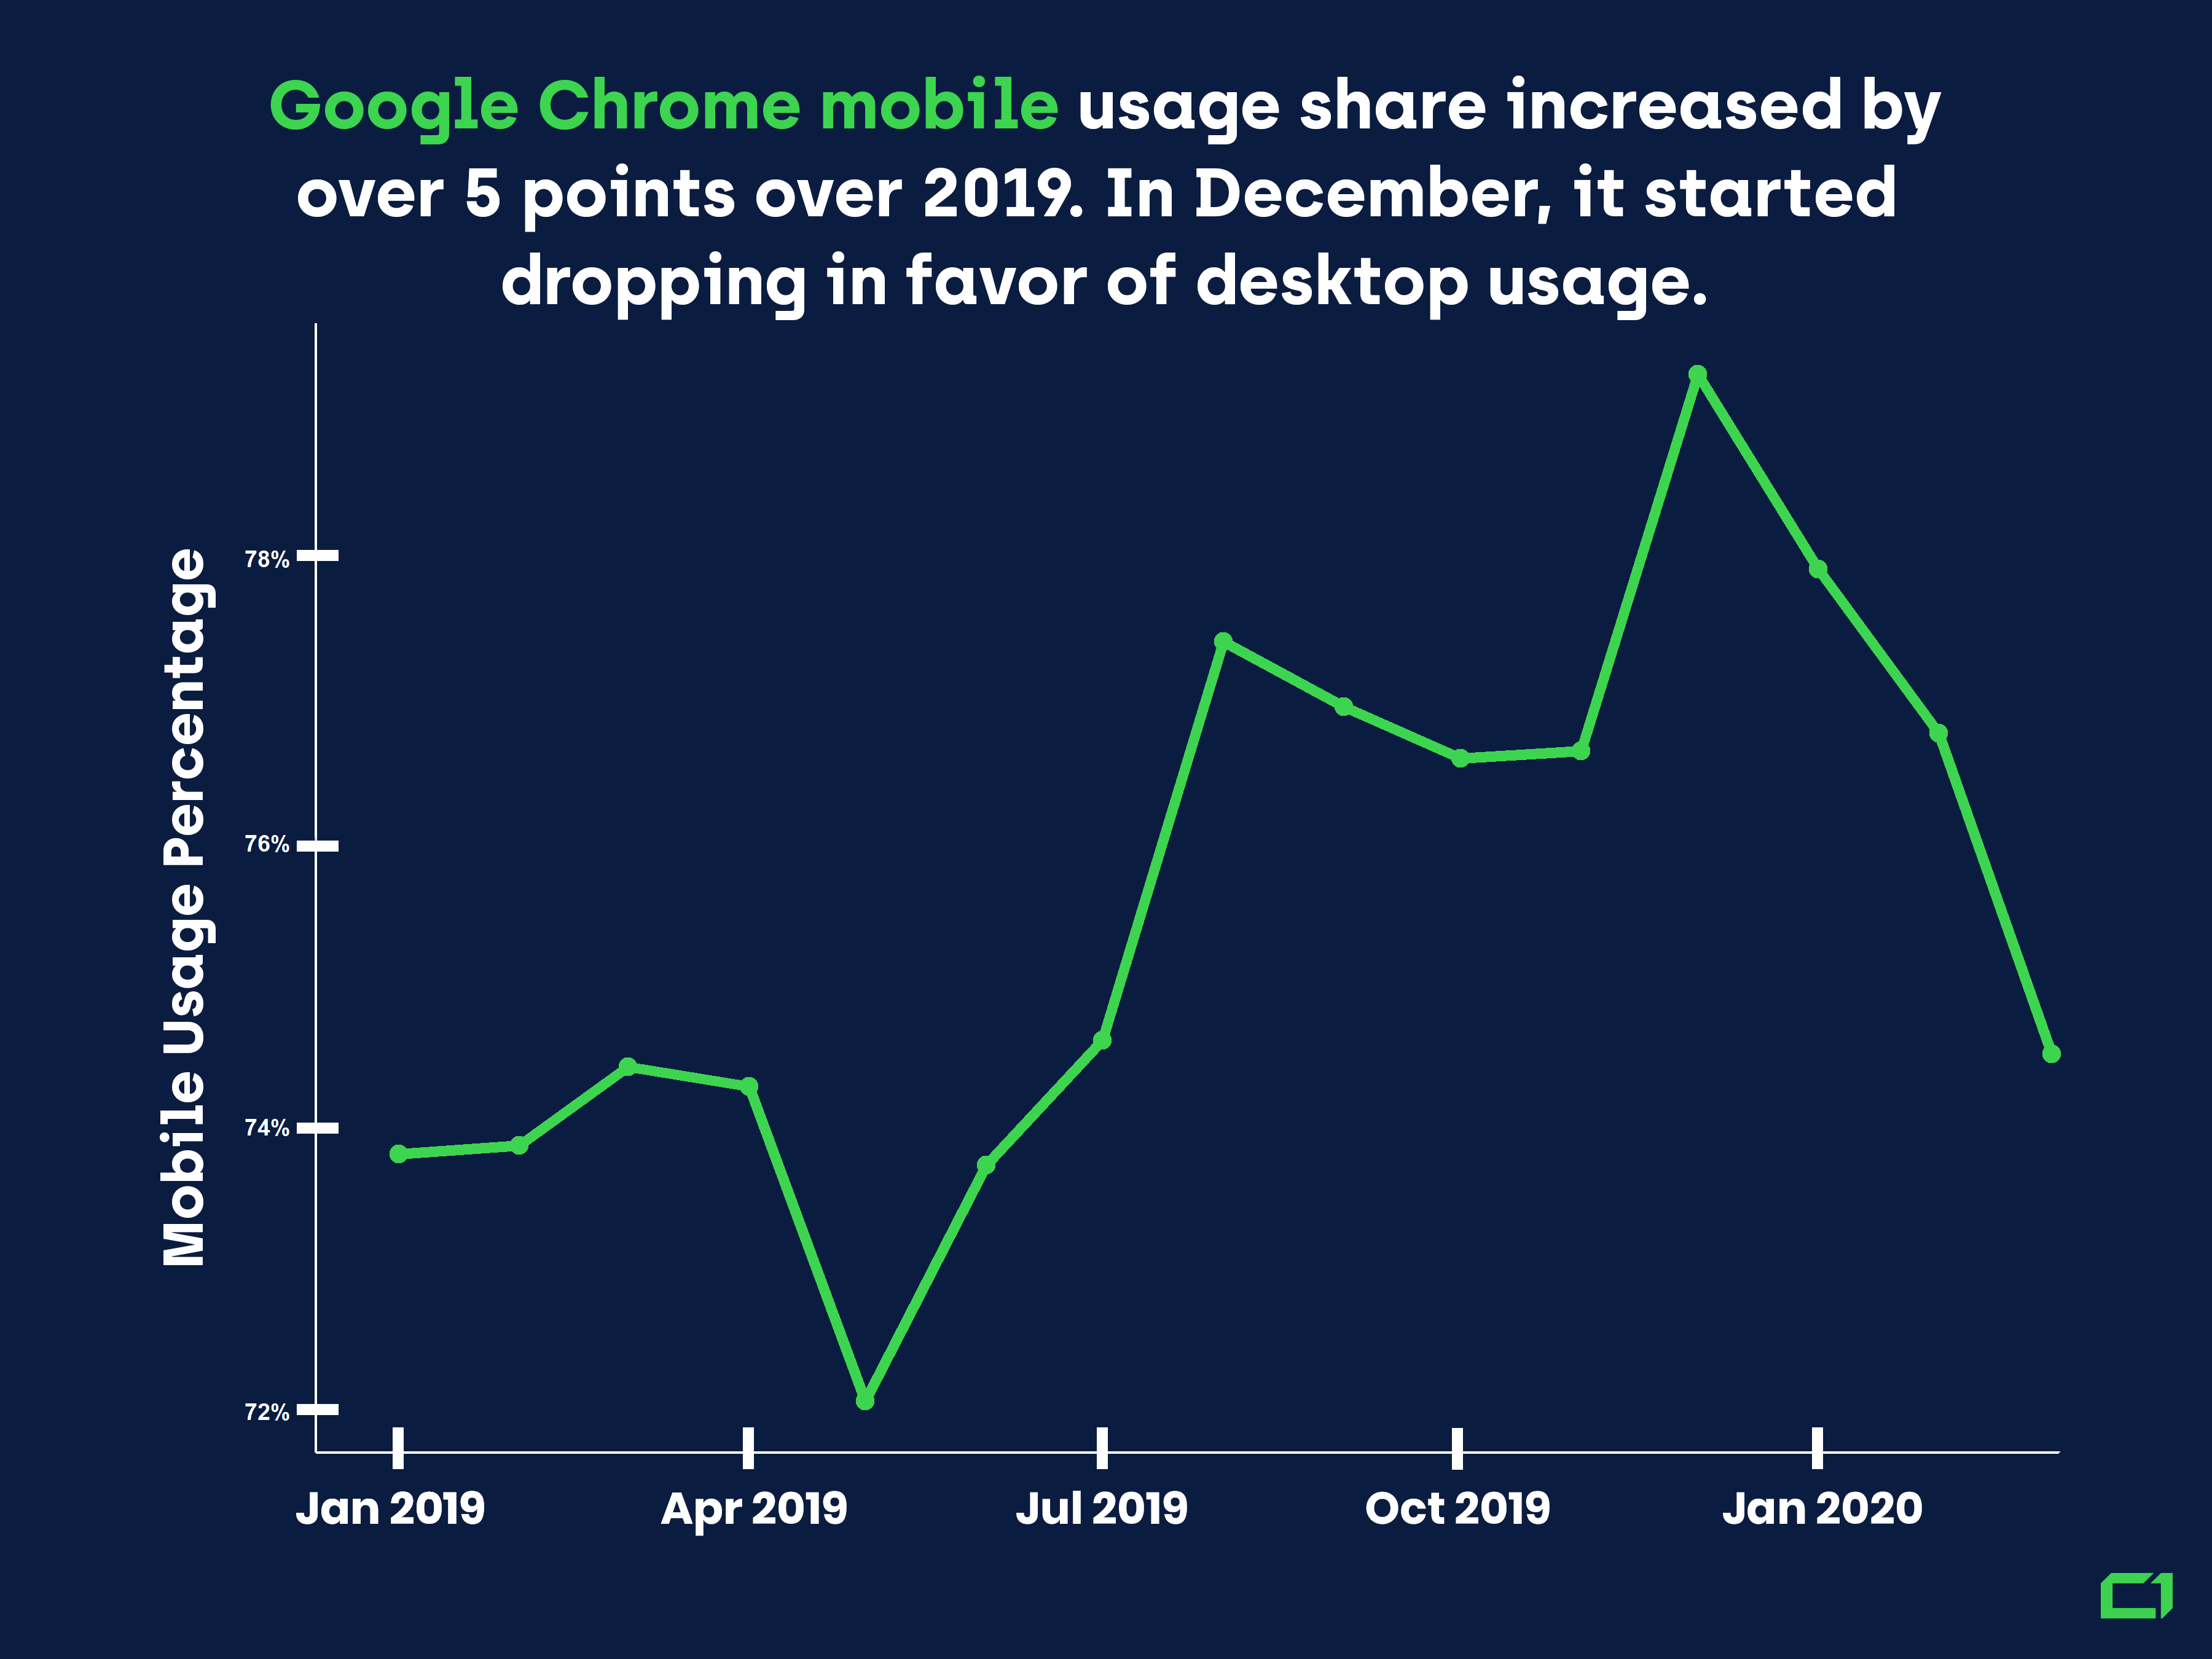 Mobile usage share has grown by 5 percentage points in 2019 and it started dropping in 2020